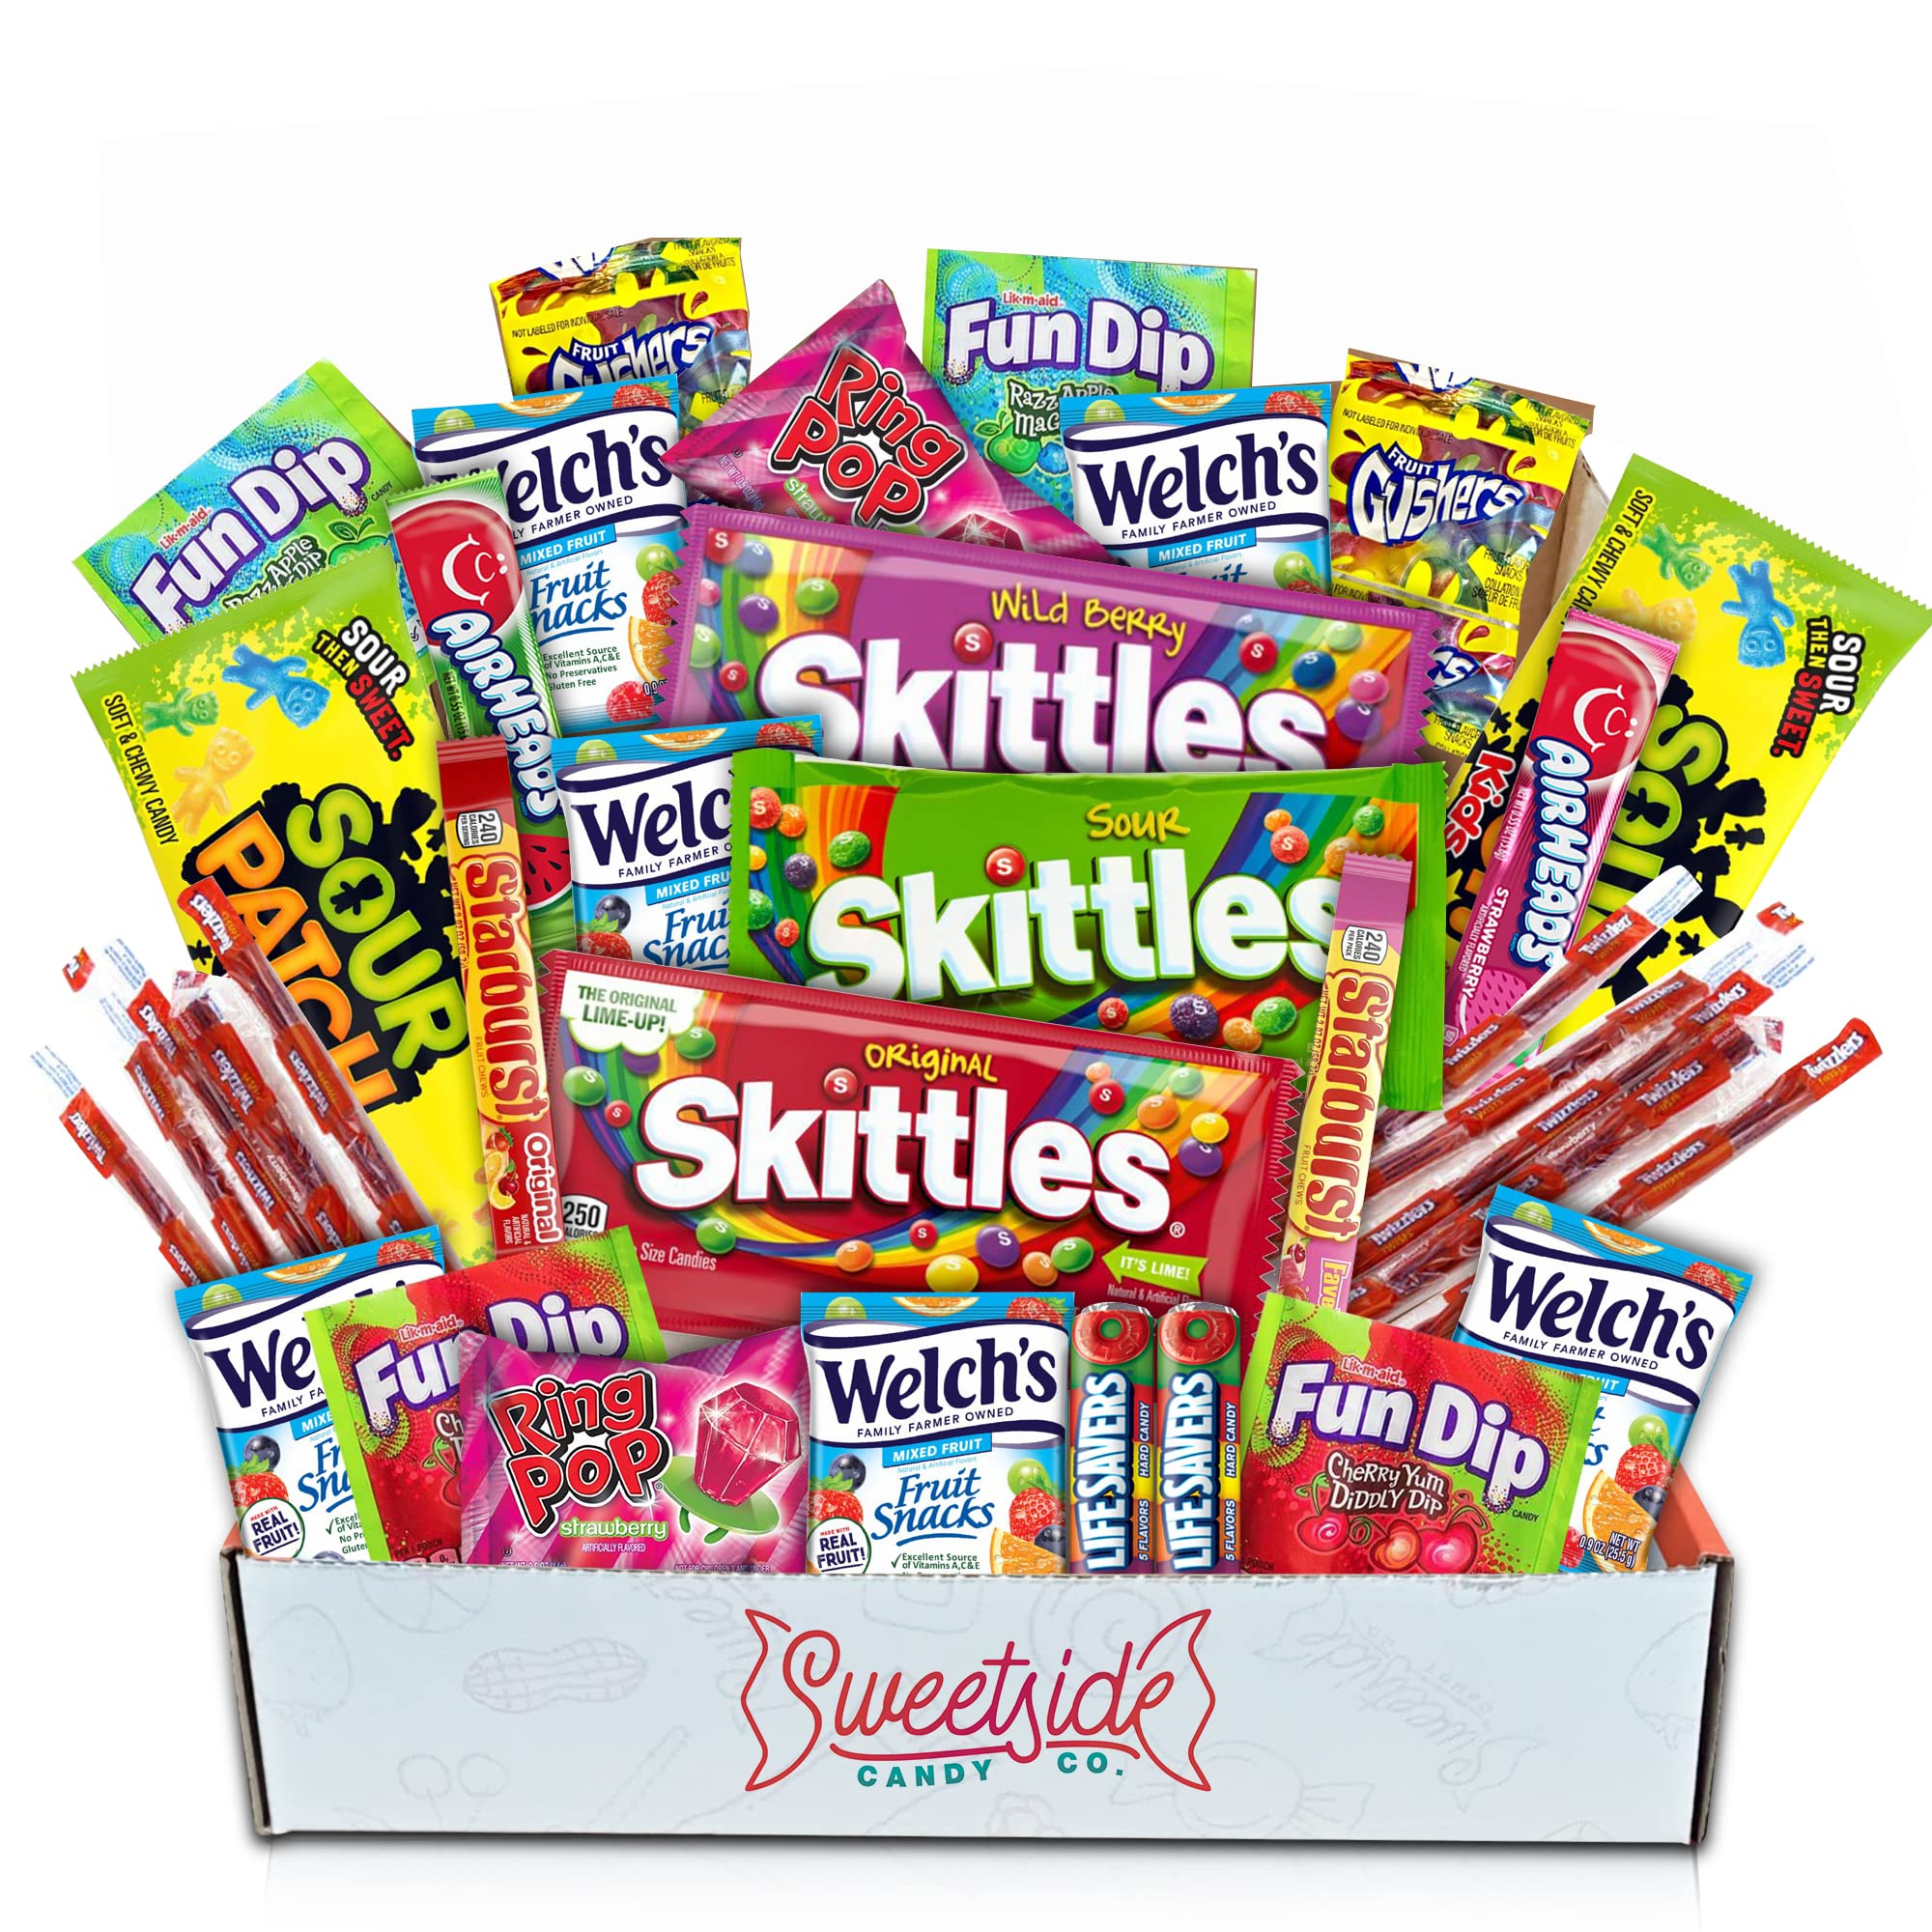 SWEETSIDE cANDY cO candy Box Snack Box Variety Pack - care Package Food gift Baskets for Women and Men - Birthday Box, Movie Night, Inmate care Pac